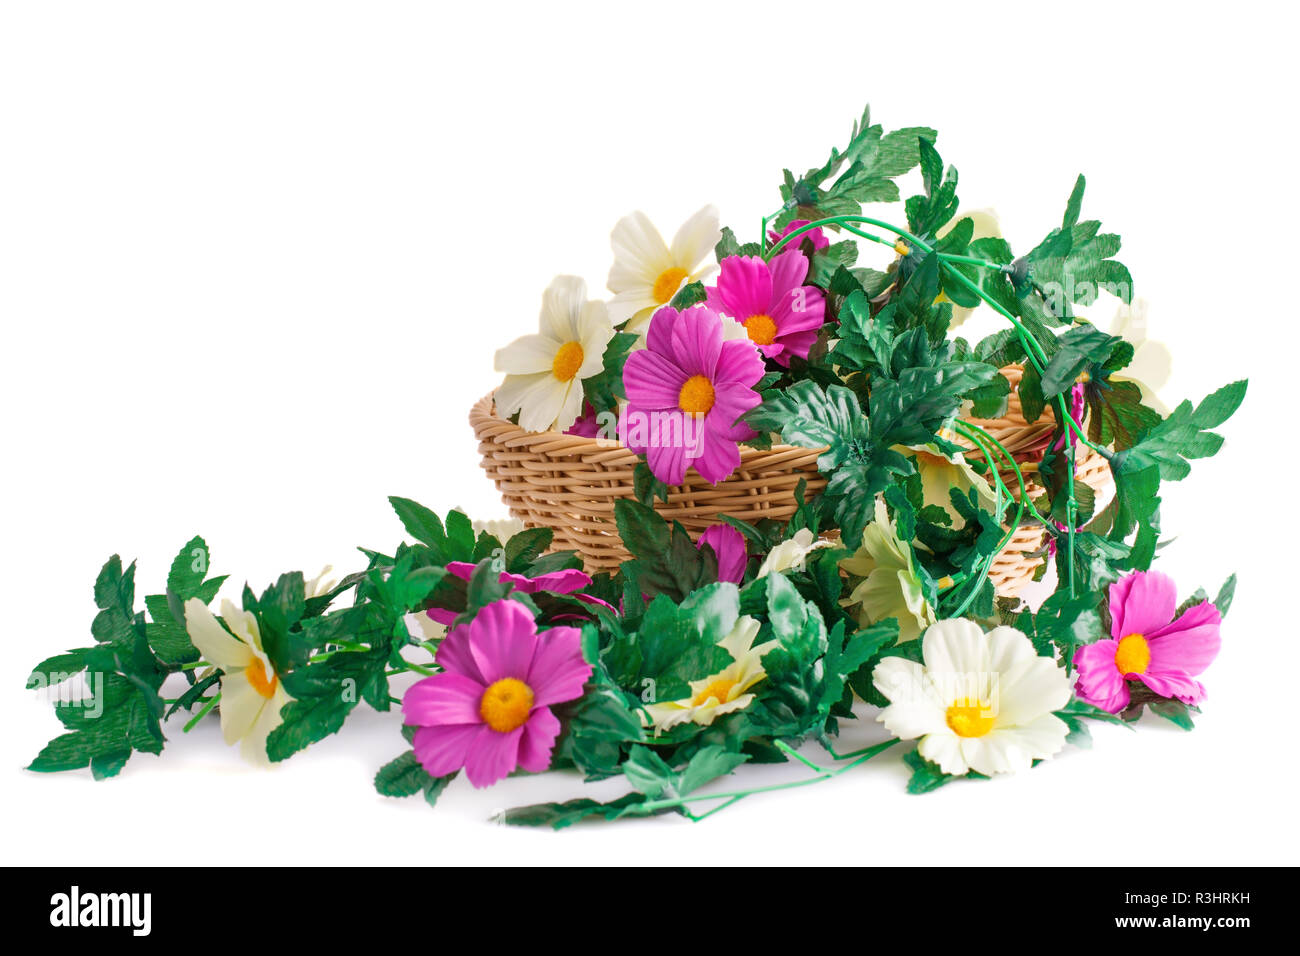 Colorful fabric flowers in wicker basket isolated on white background. Stock Photo